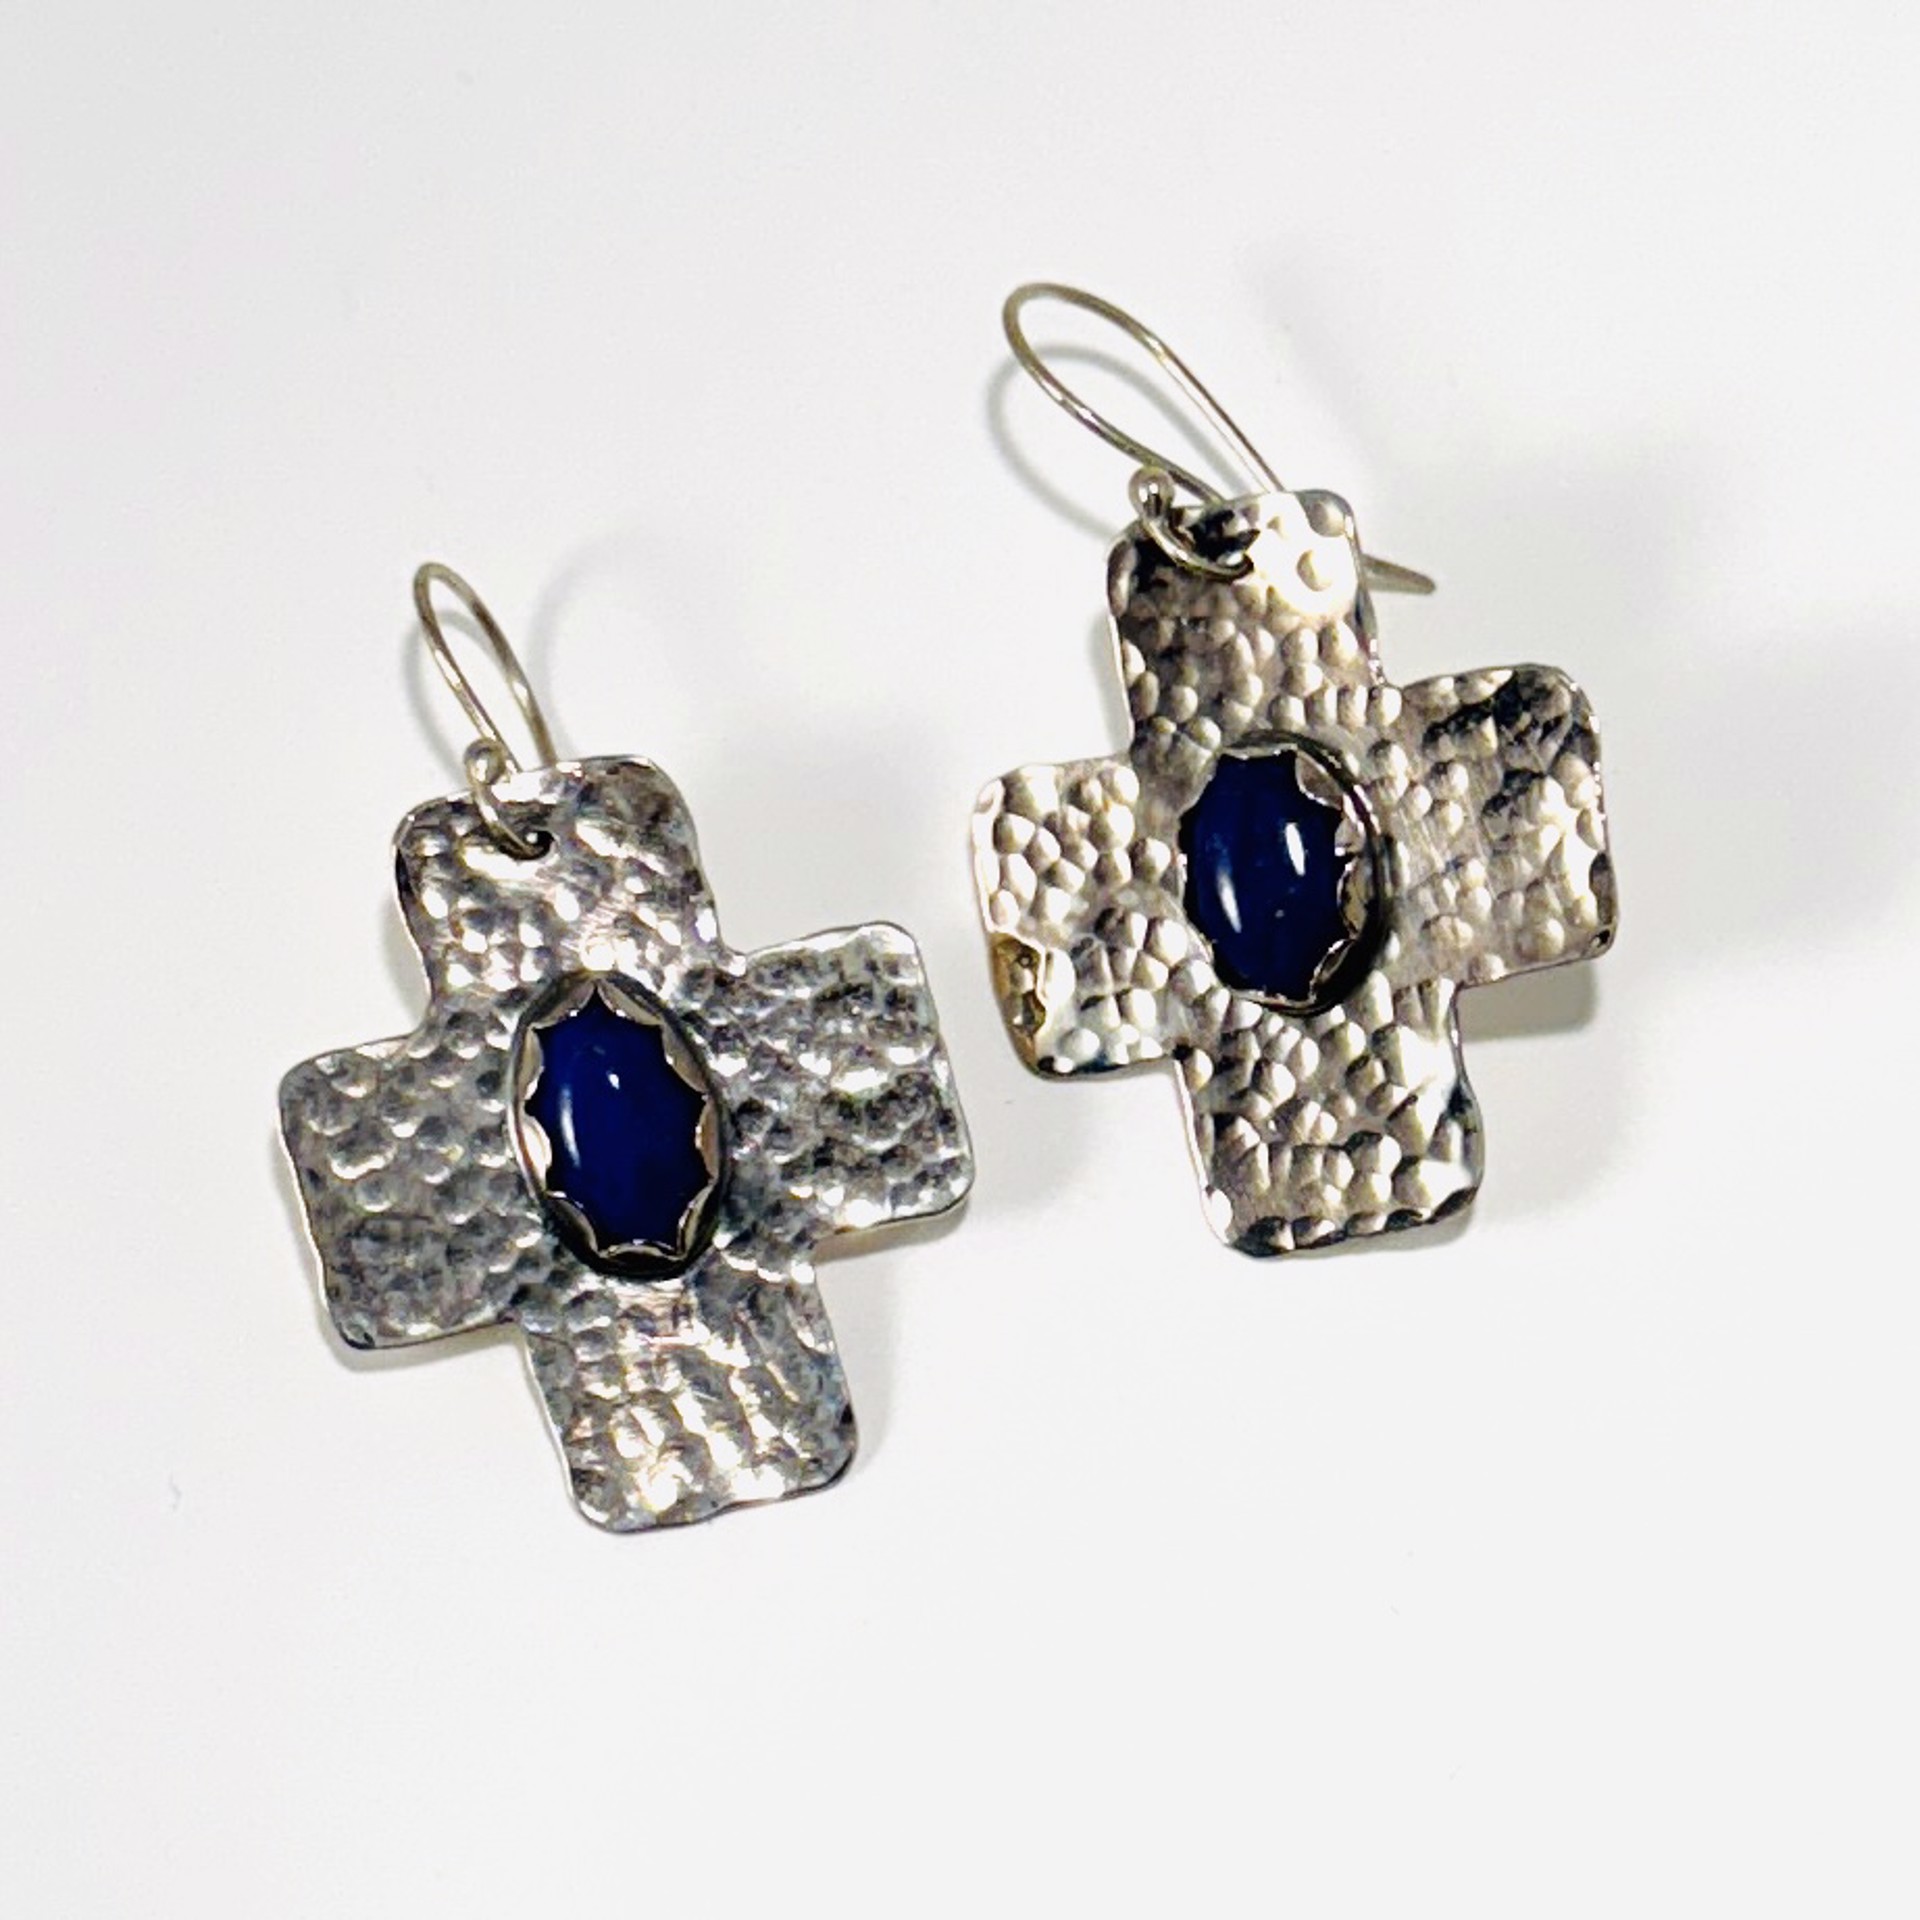 Lapis on Hammered Silver Cross Earrings AB23-87 by Anne Bivens